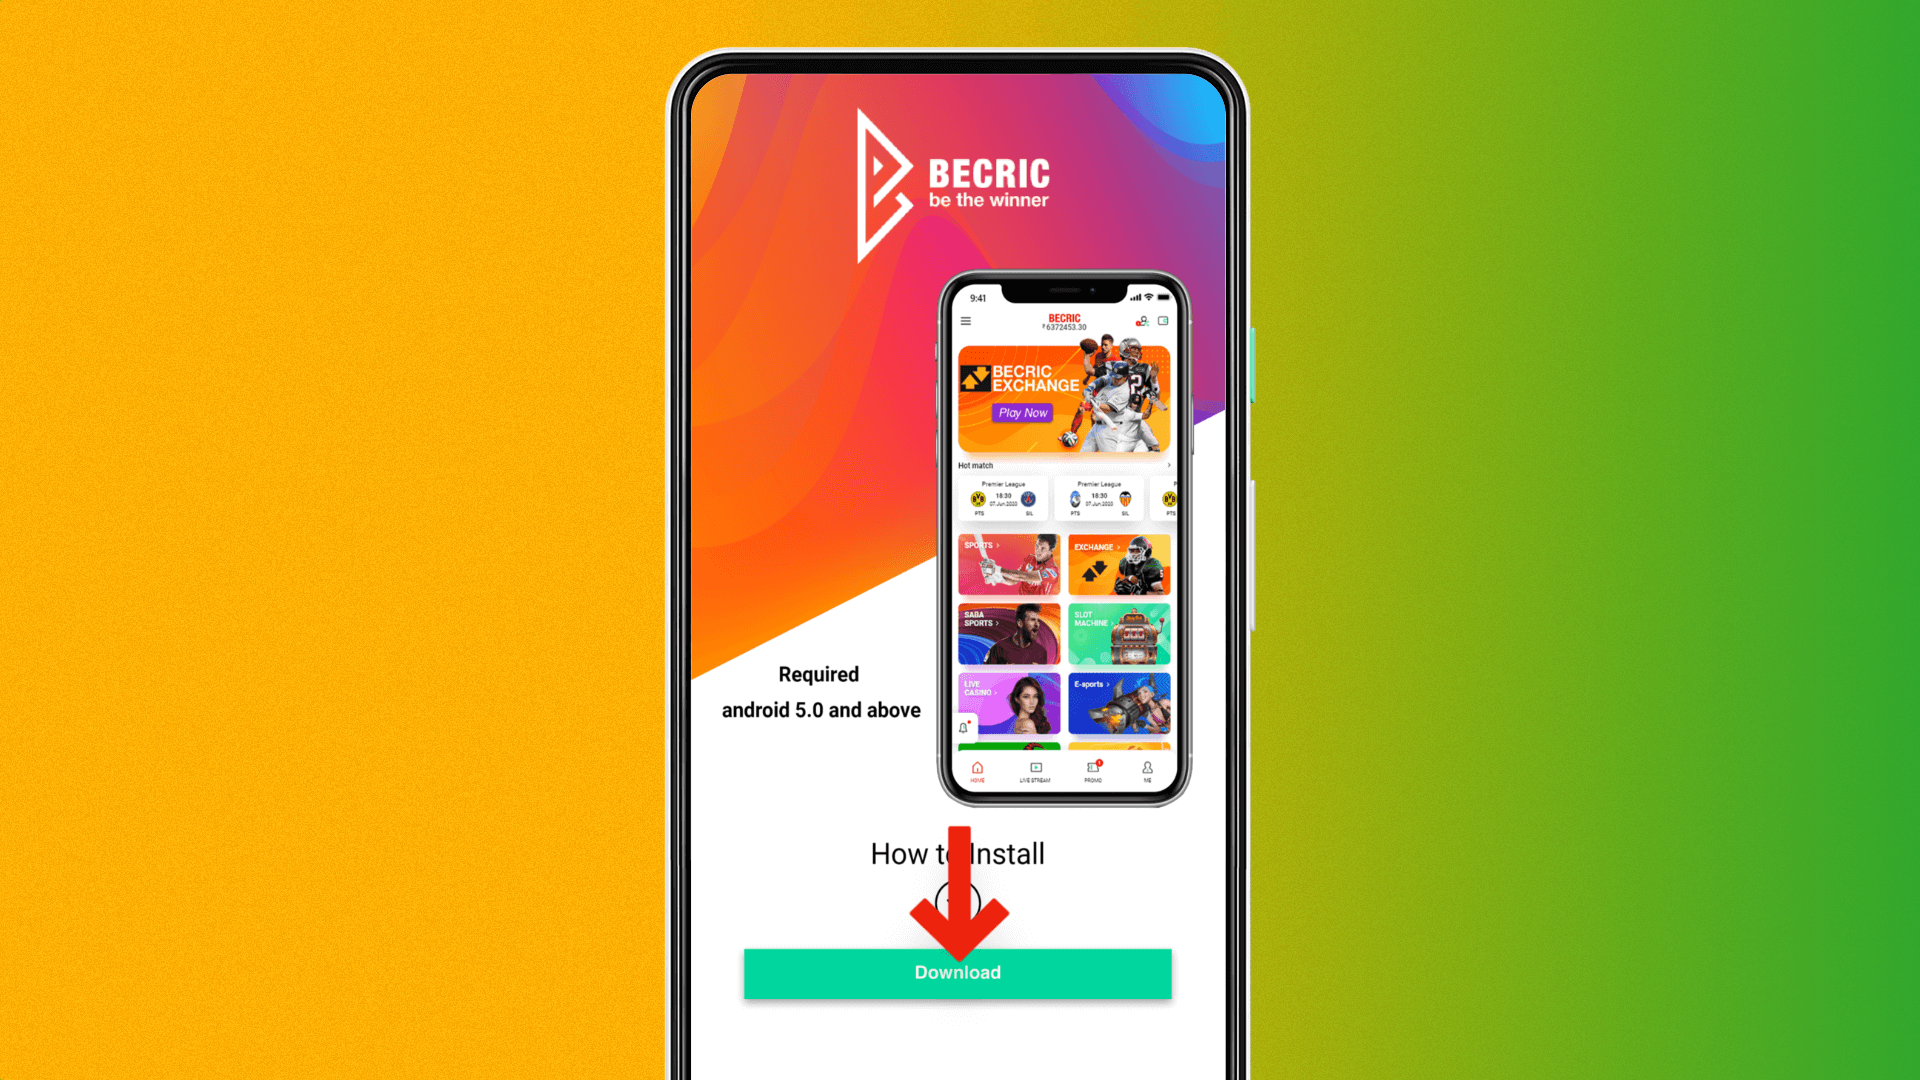 Becric website page with Android app